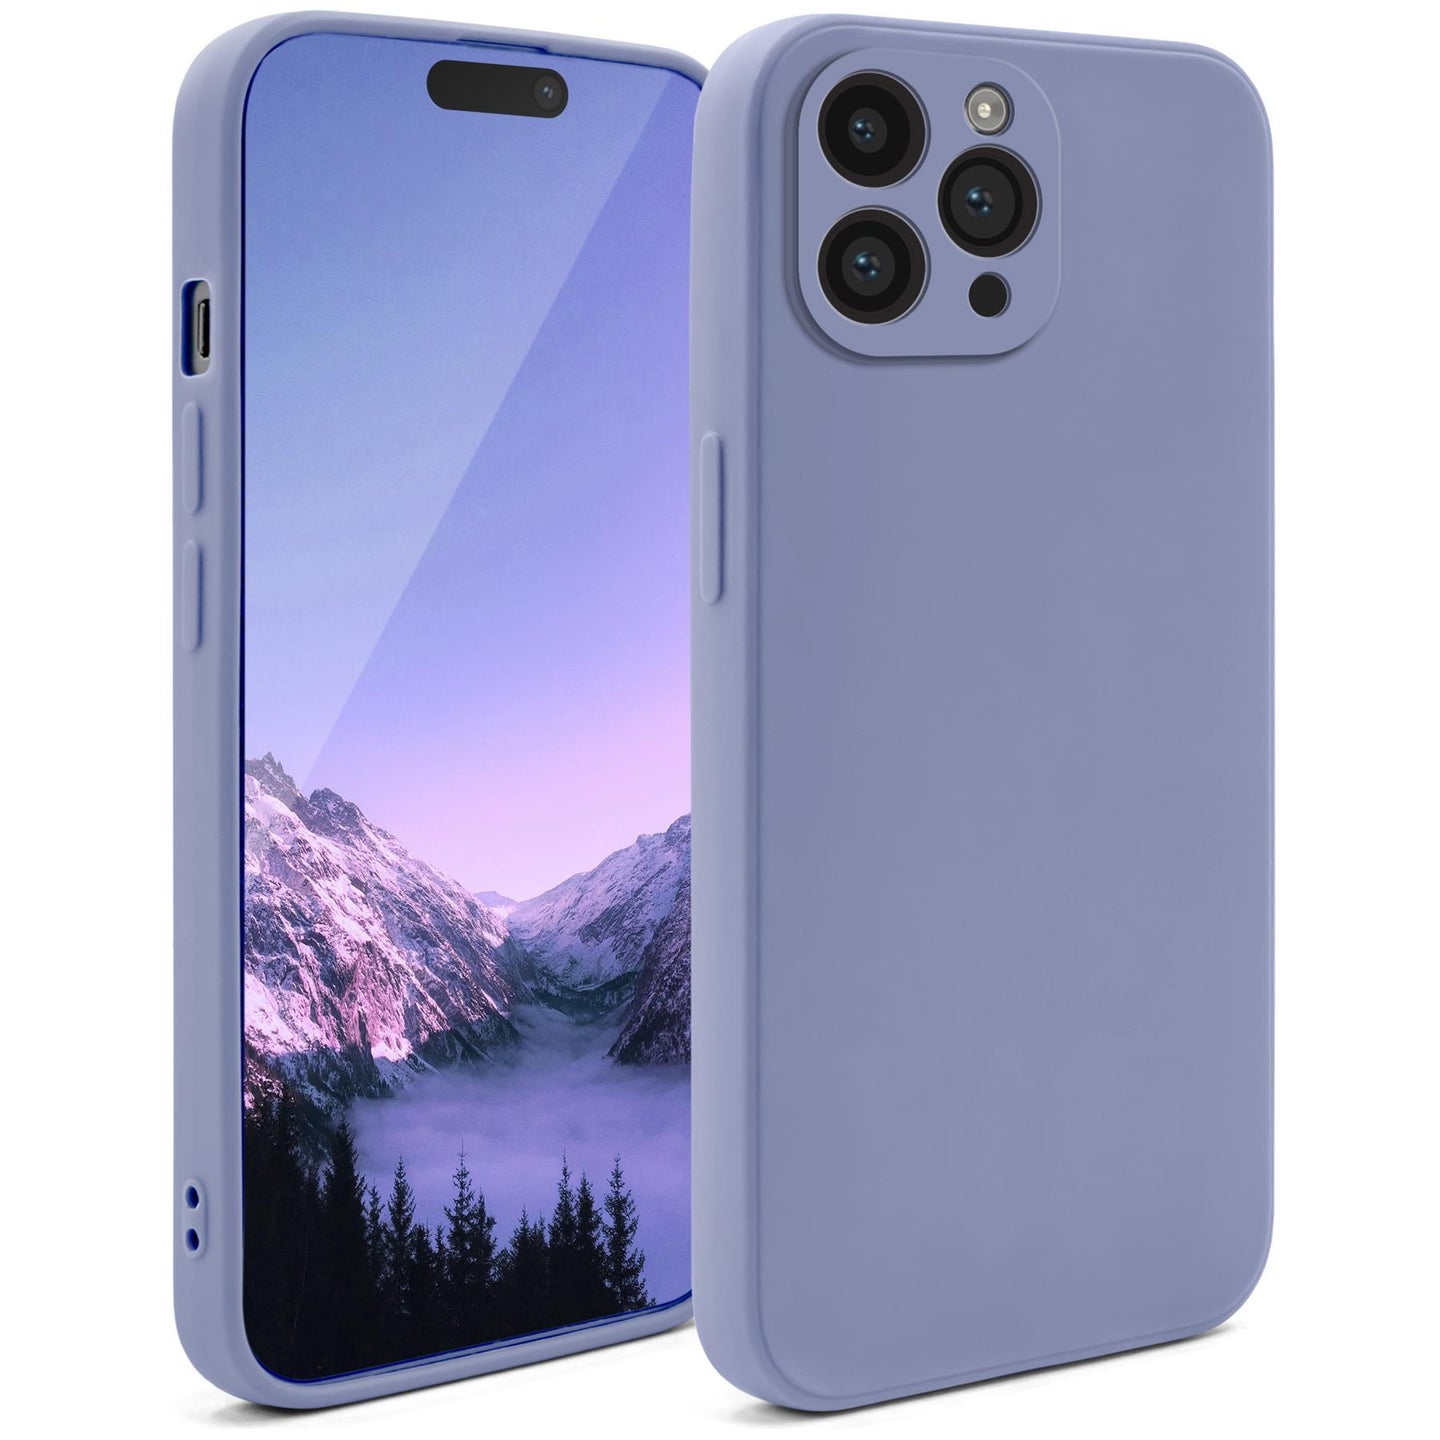 Moozy Minimalist Series Silicone Case for iPhone 14 Pro Max, Blue Grey - Matte Finish Lightweight Mobile Phone Case Slim Soft Protective TPU Cover with Matte Surface